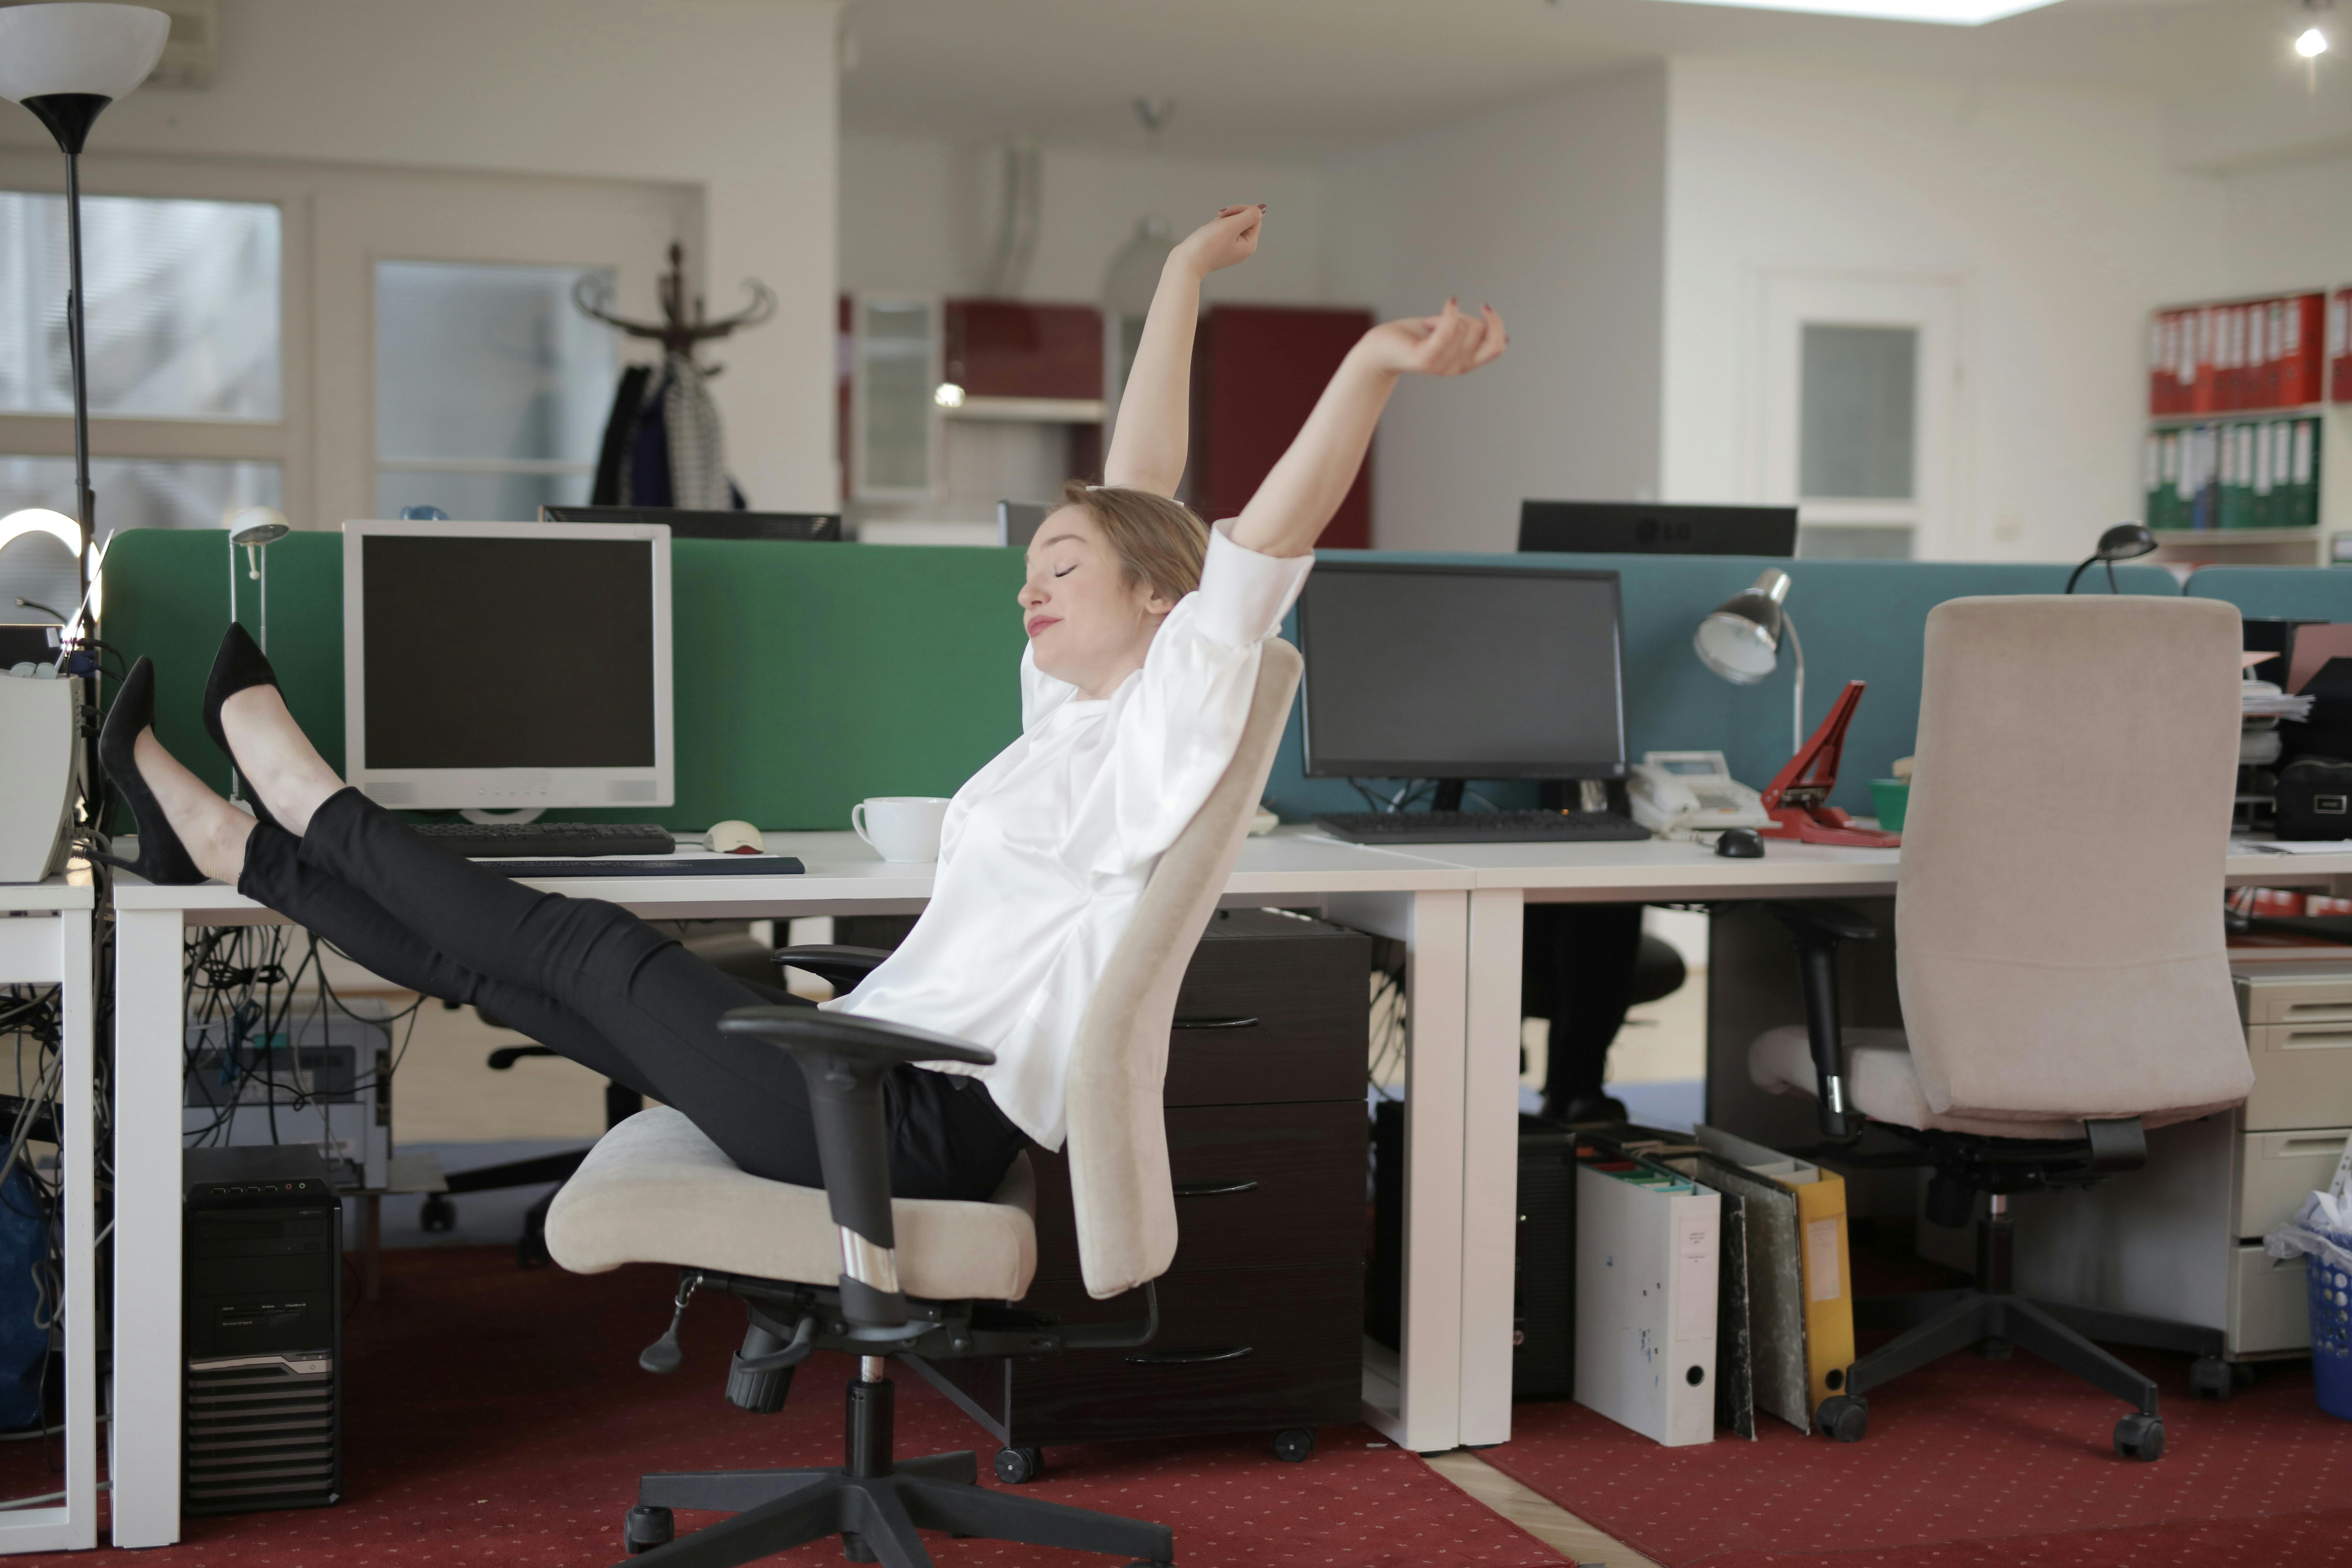 woman in white shirt stretching in work chair